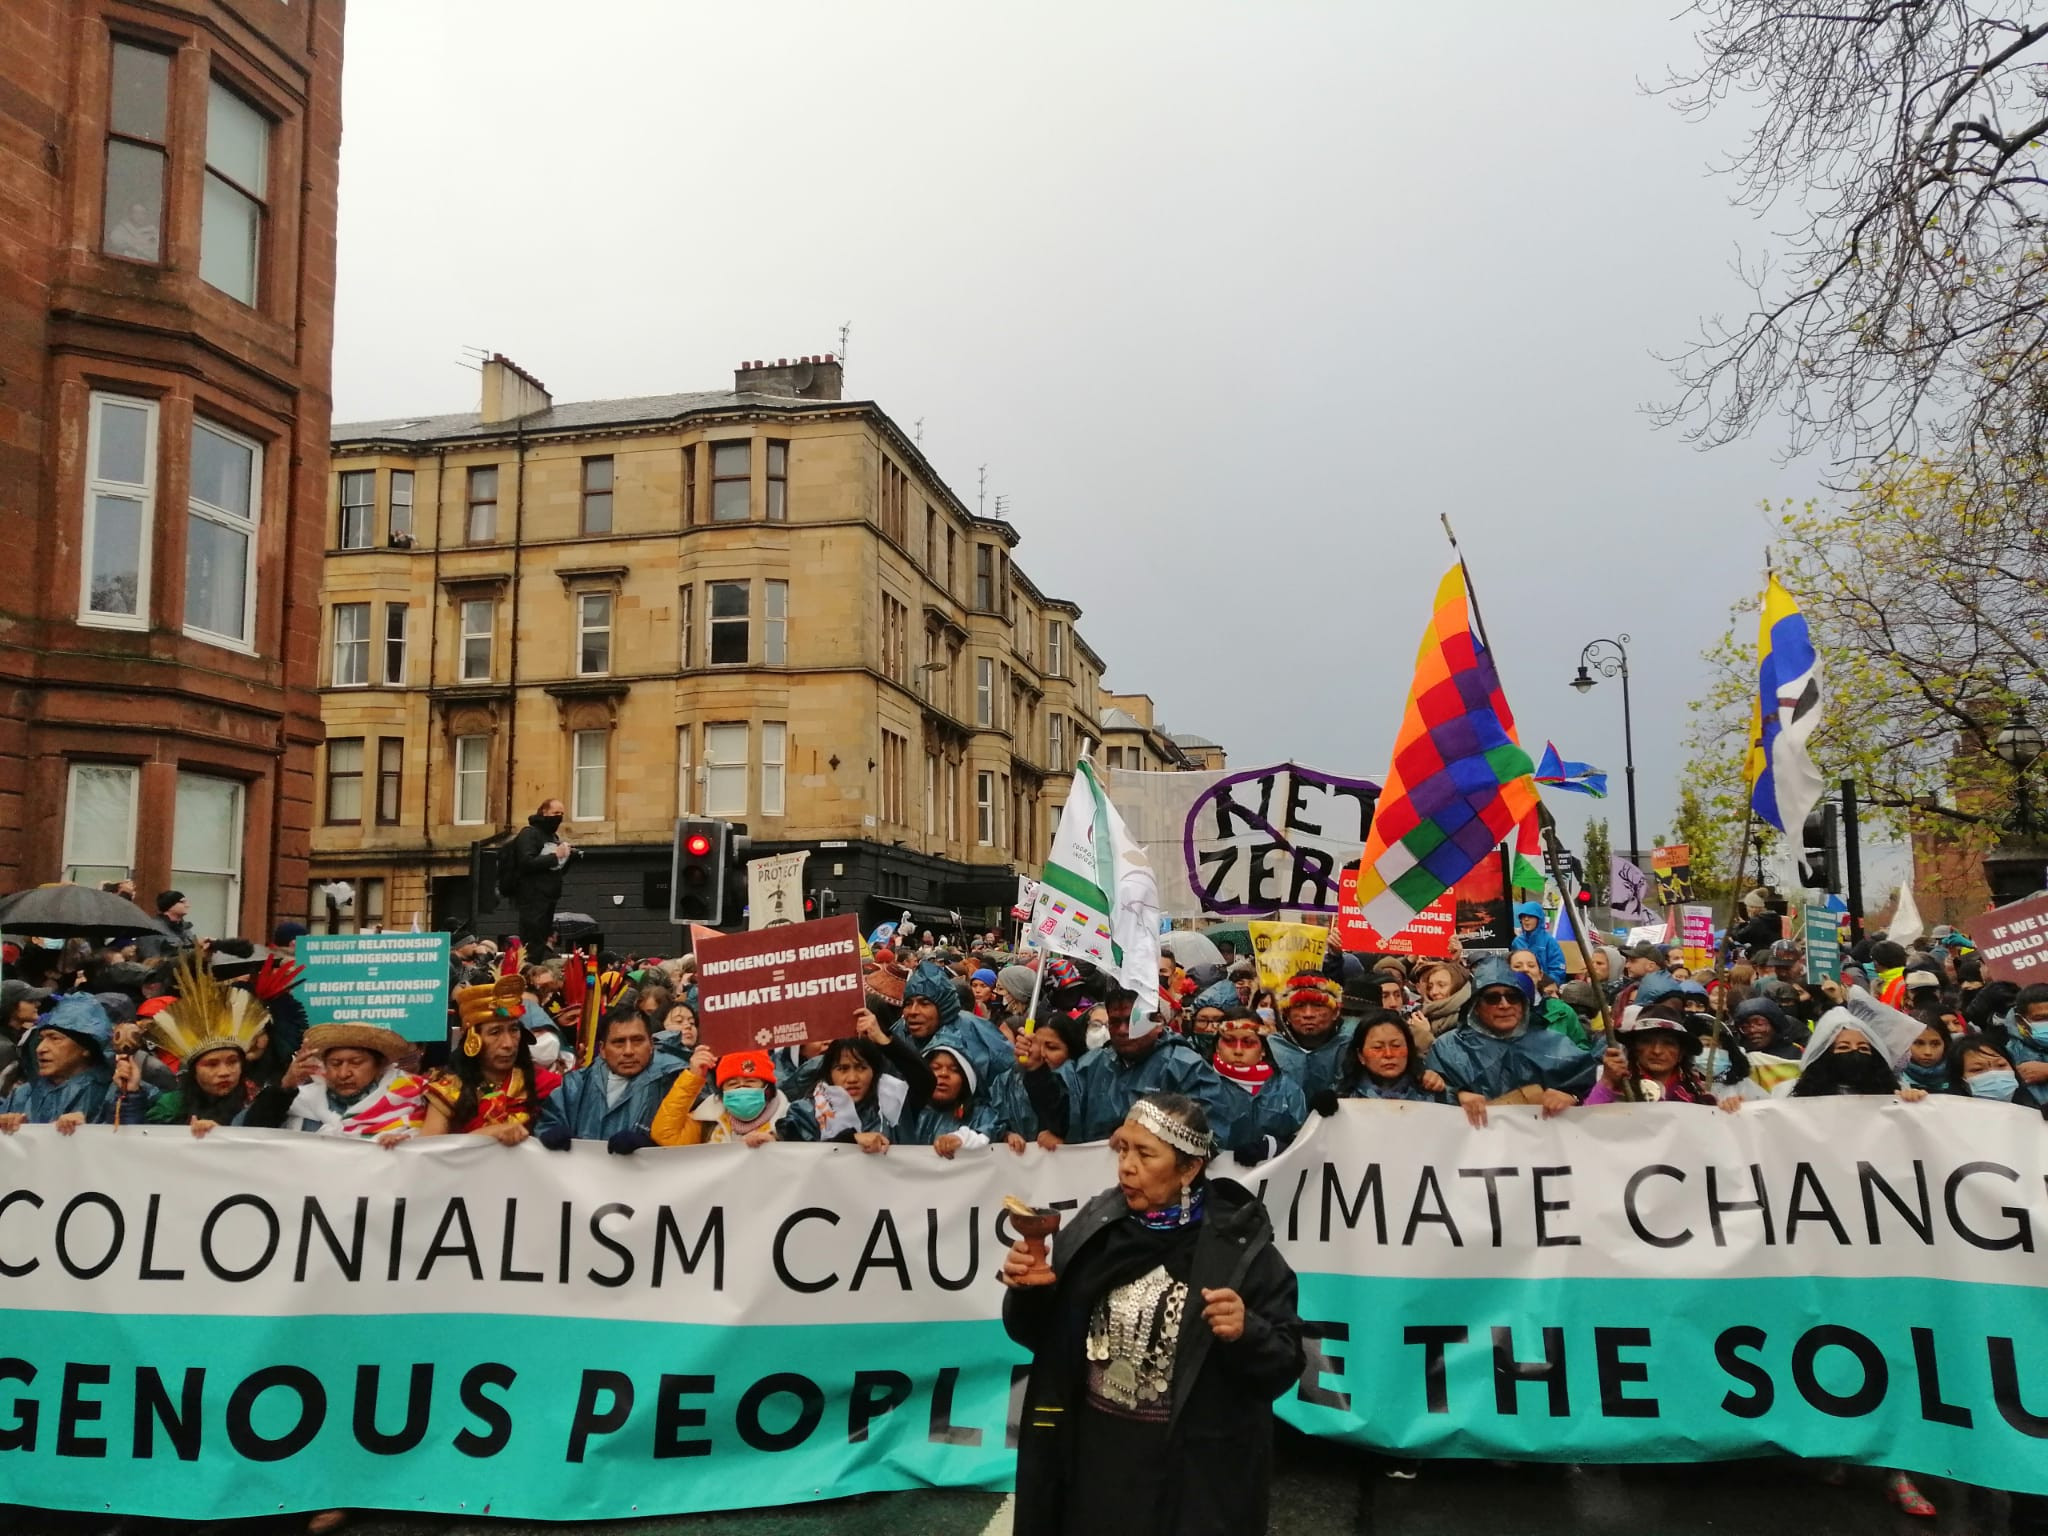 Climate activists protesting in the streets of Glasgow, holding a banner and signs.